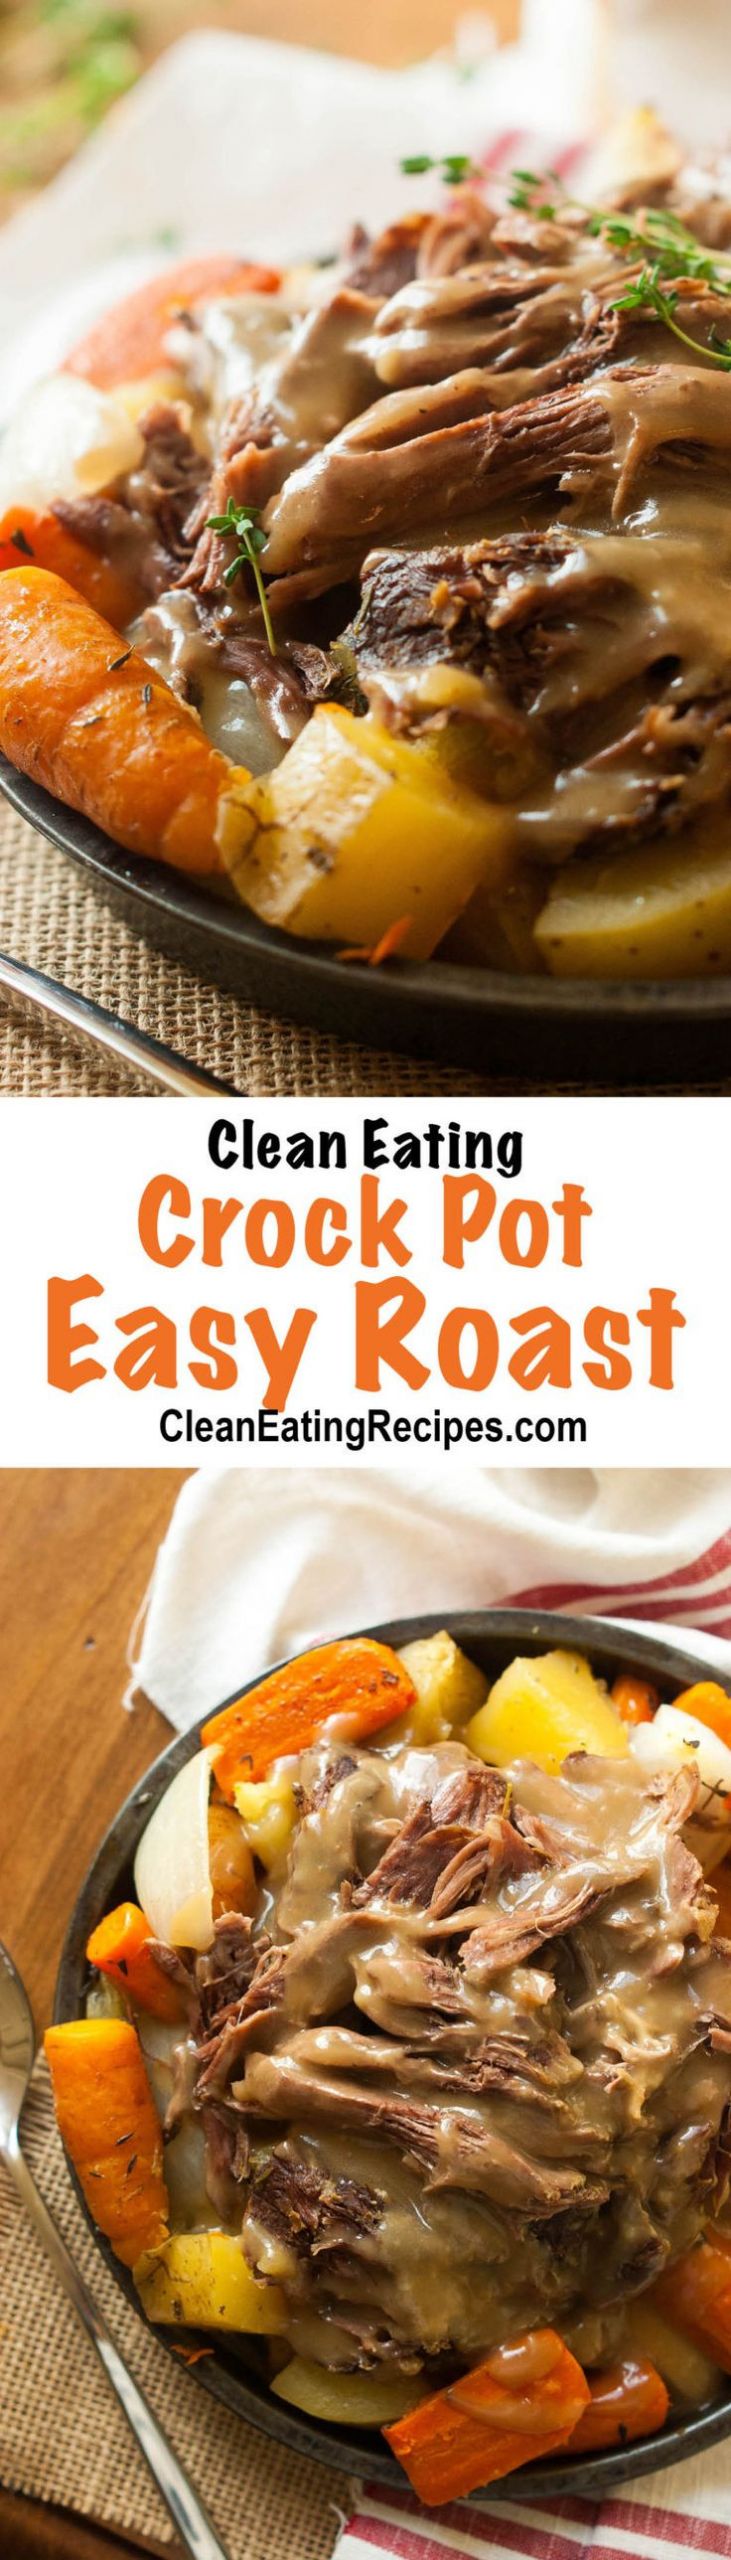 Clean Eating Crock Pot
 28 best images about Clean eating crock pot recipes on